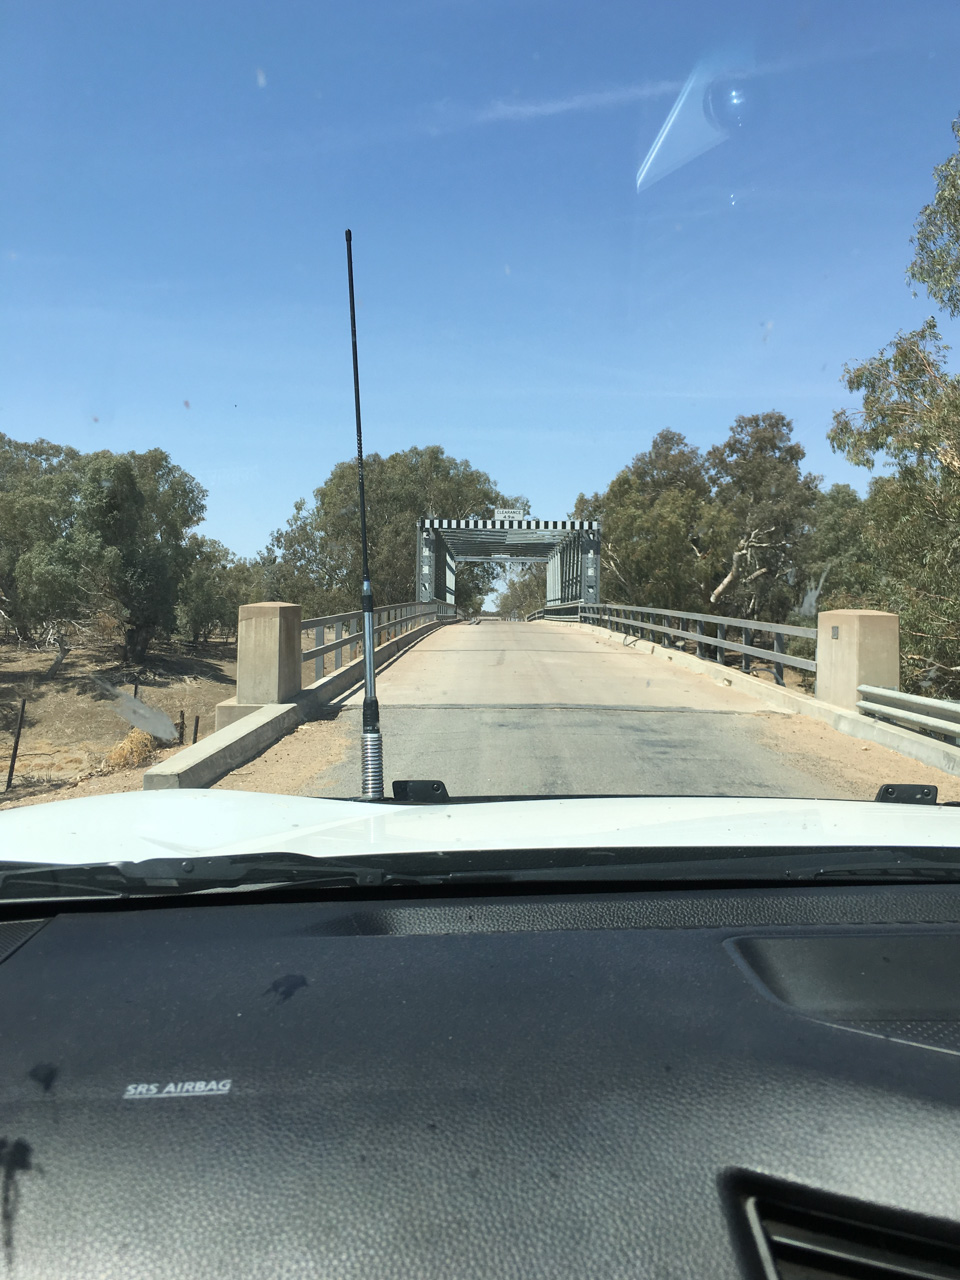 Crossing The Bridge At Louth On The Darling River Run